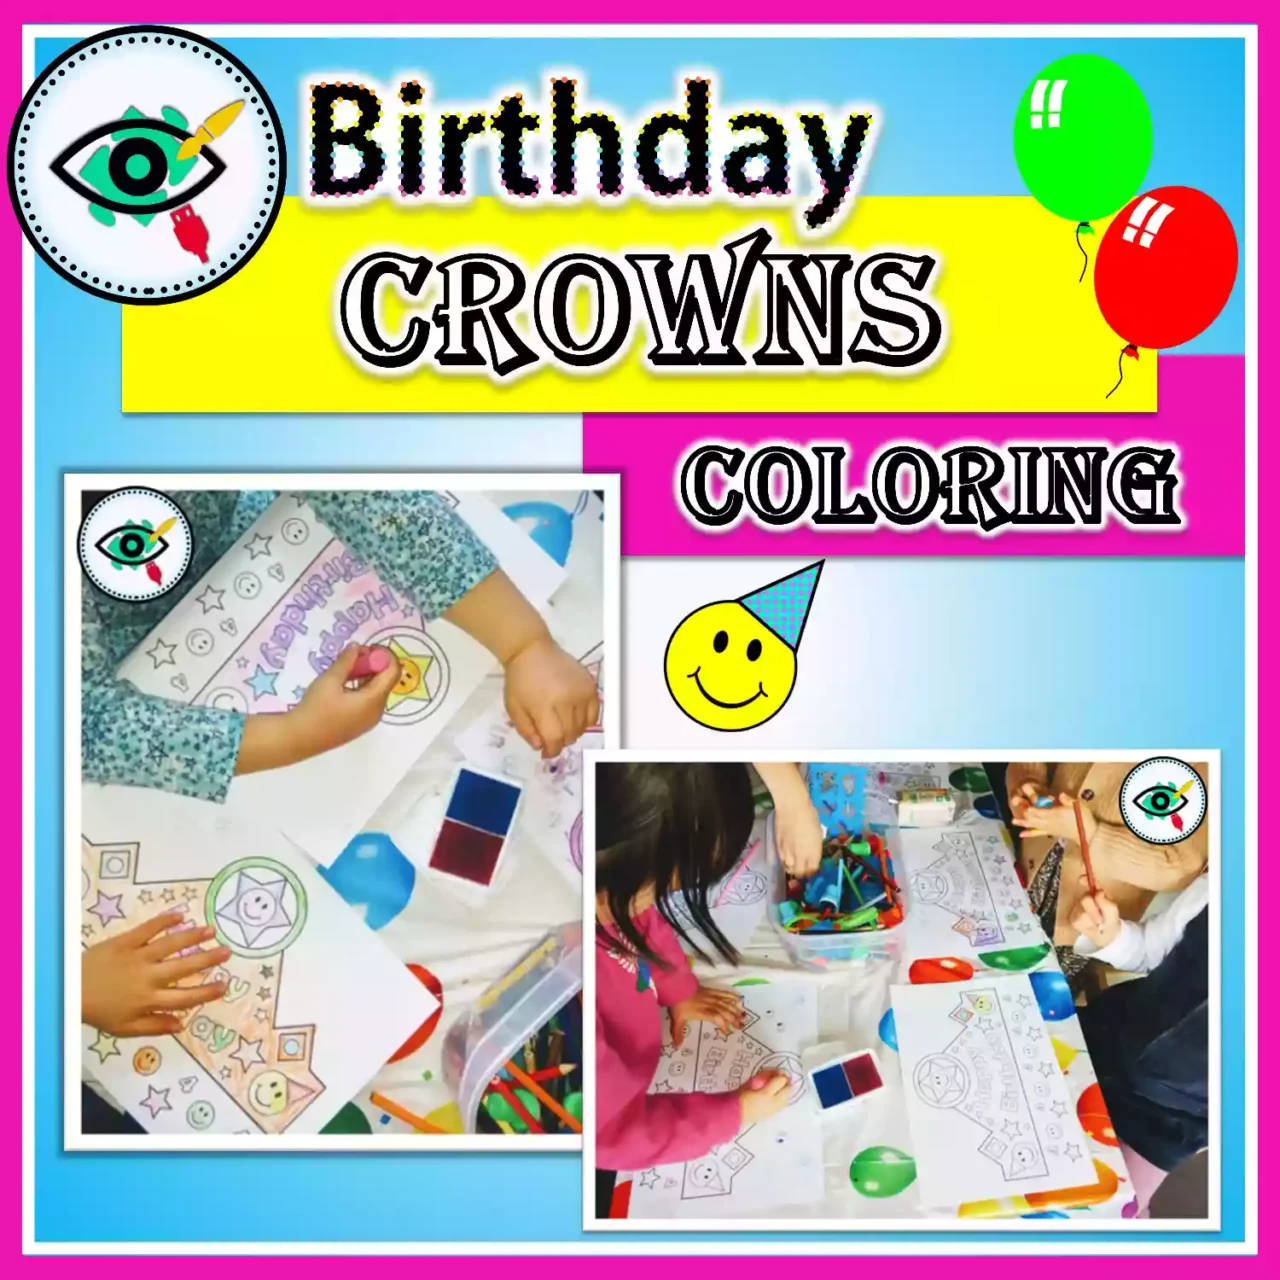 Crafts for Kids - Birthday Crowns - Featured 2